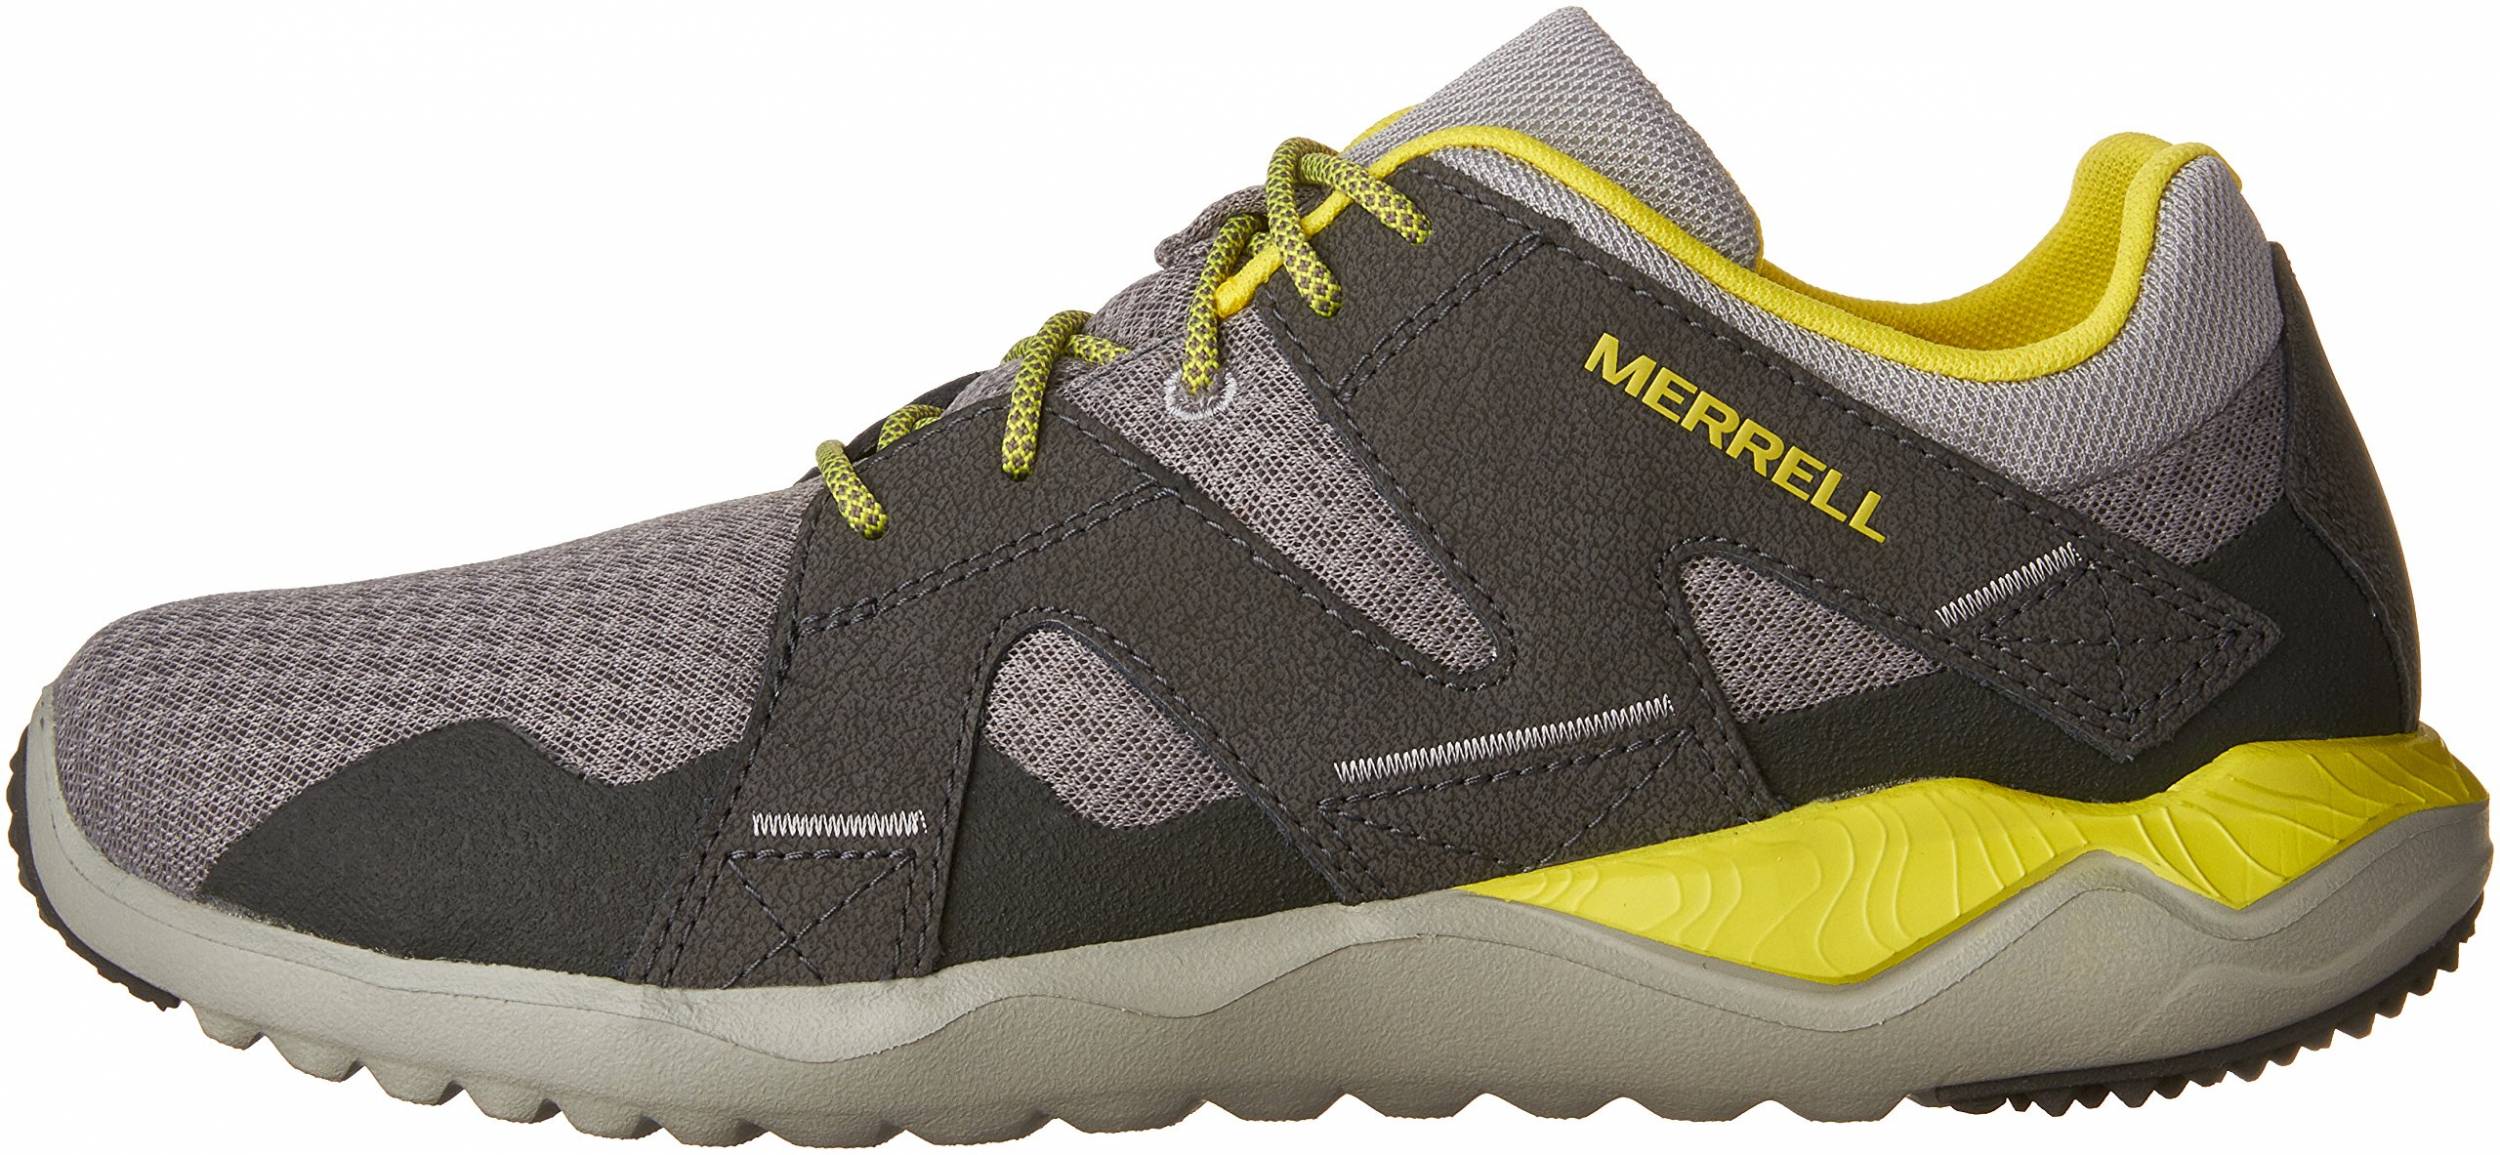 Merrell 1SIX8 Mesh Trainers Mens Lightweight Breathable Sports Shoes J91353 